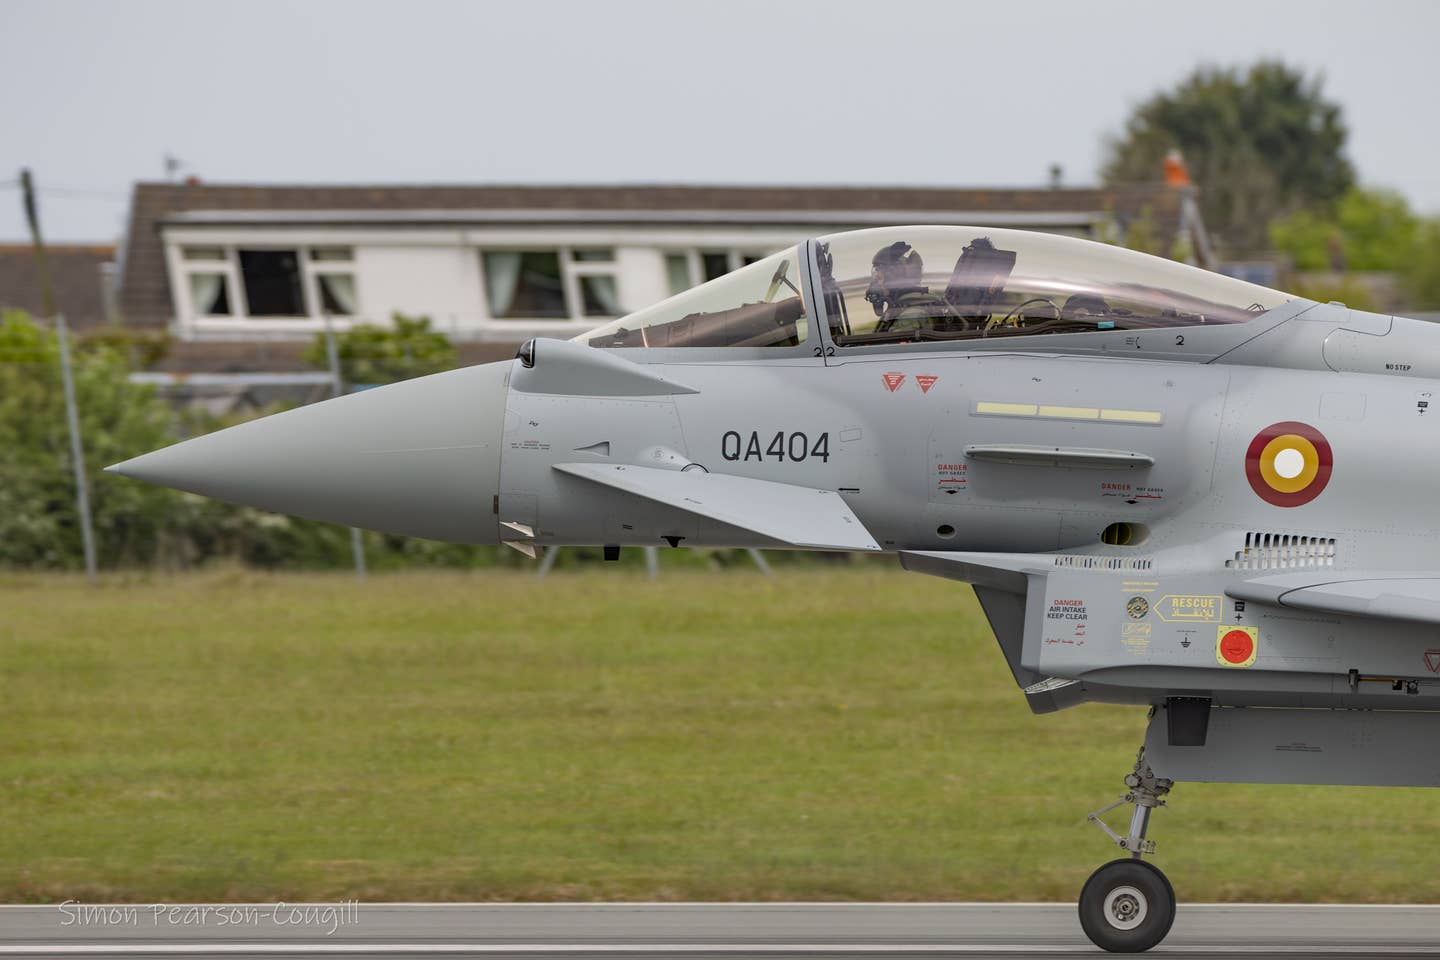 A BAE Systems test pilot prepares to depart Warton in the recently painted Qatari Typhoon. <em>Simon Pearson-Cougill</em>